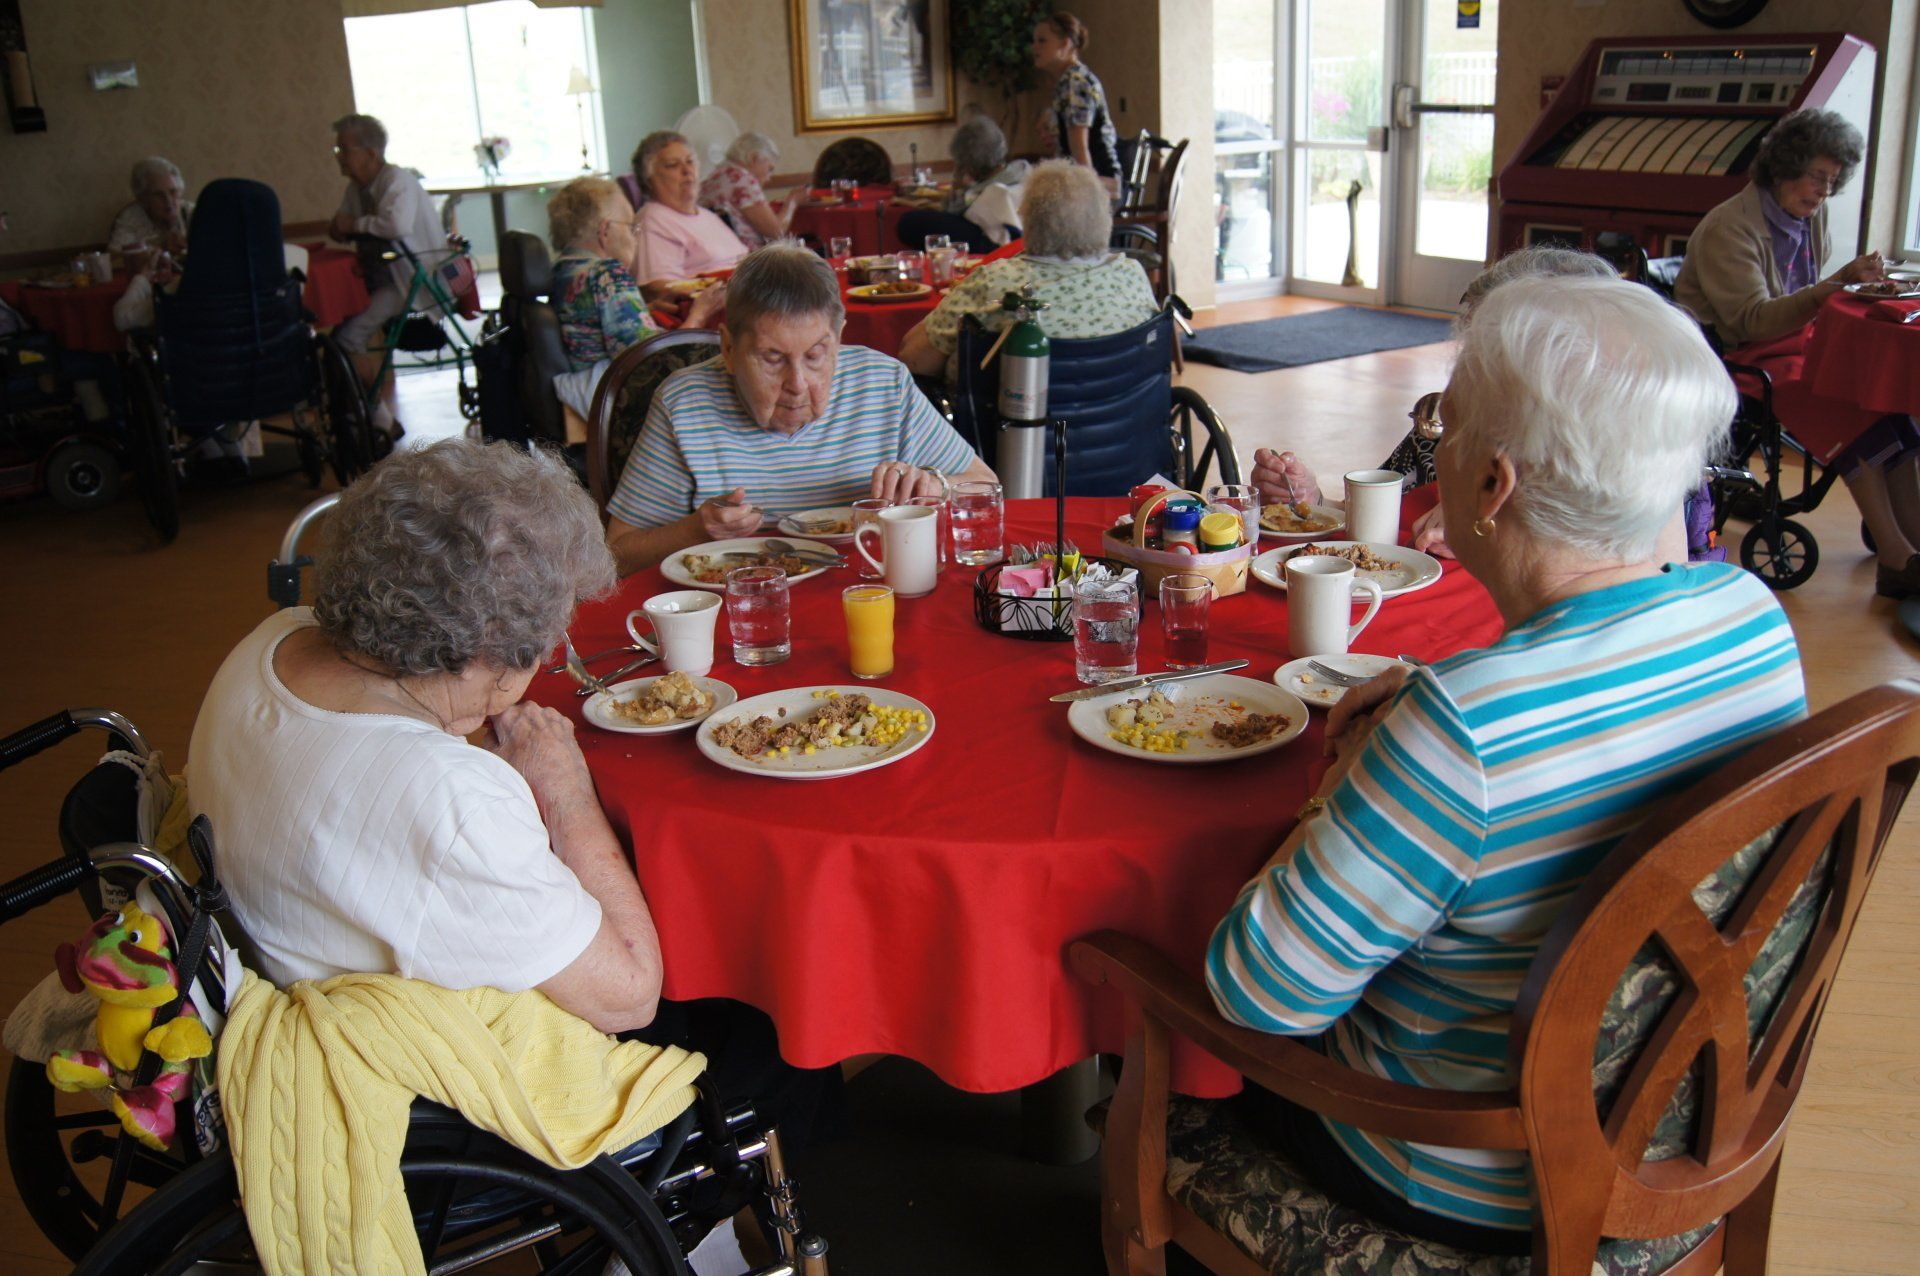 Elders Eating Dinner in Dining Hall at Lenawee Medical Care Facility in Adrian, MI